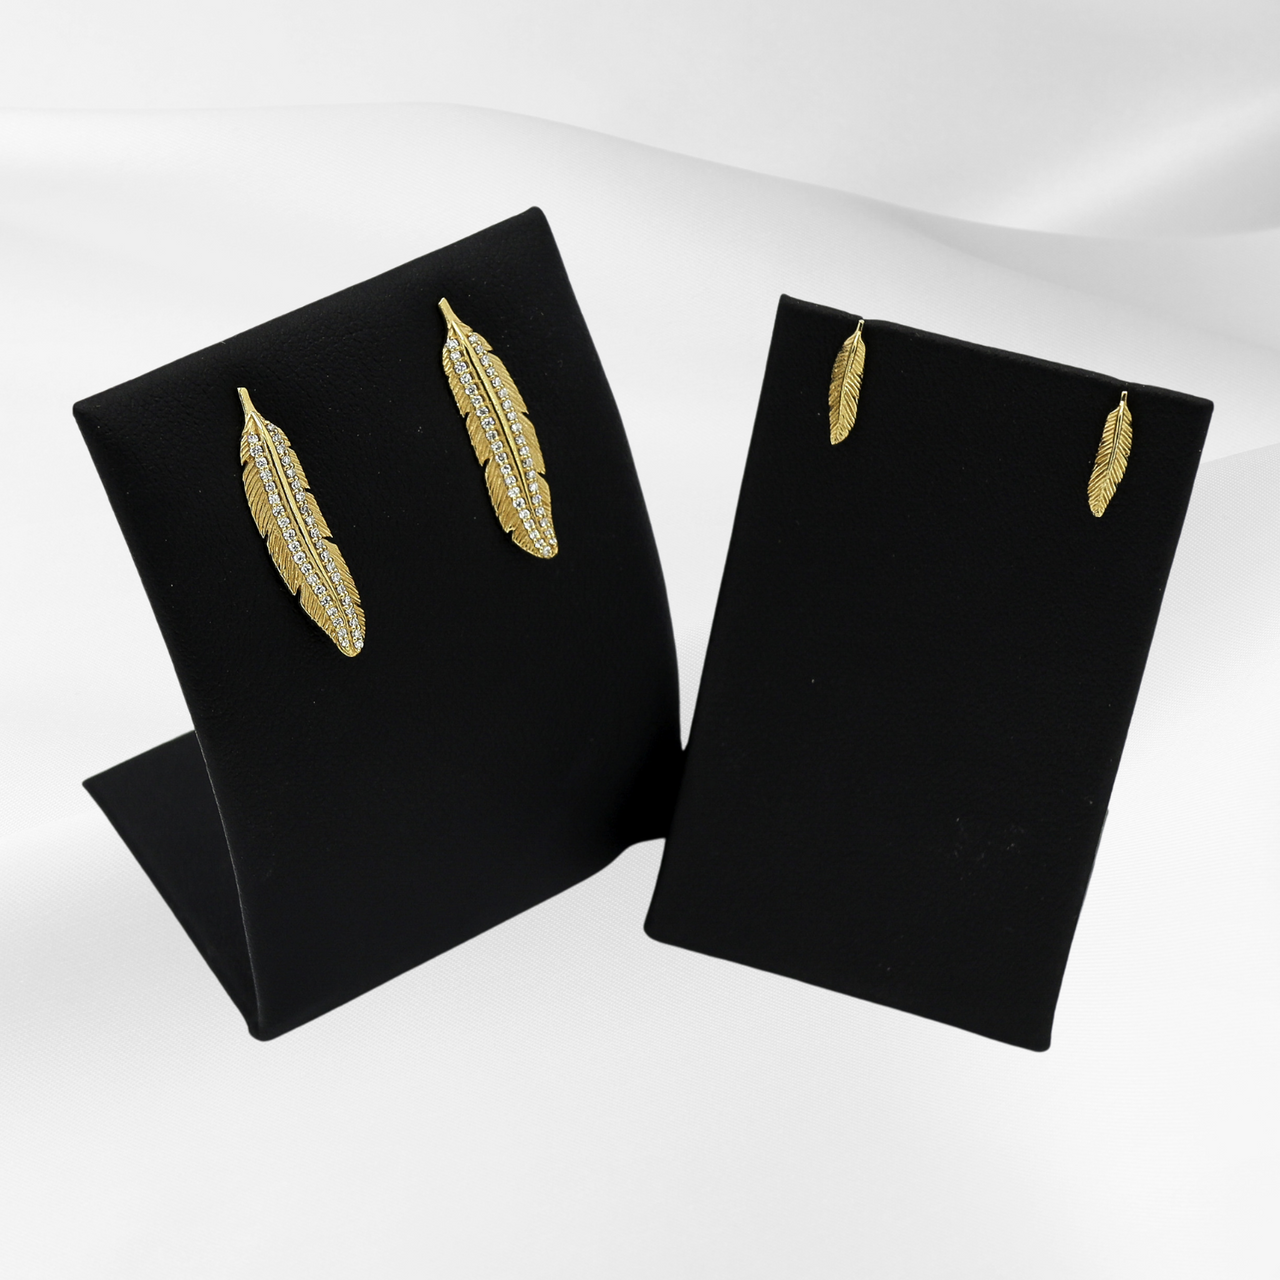 Soar with Joy™ 14k yellow gold with diamonds earrings and petite feather earrings